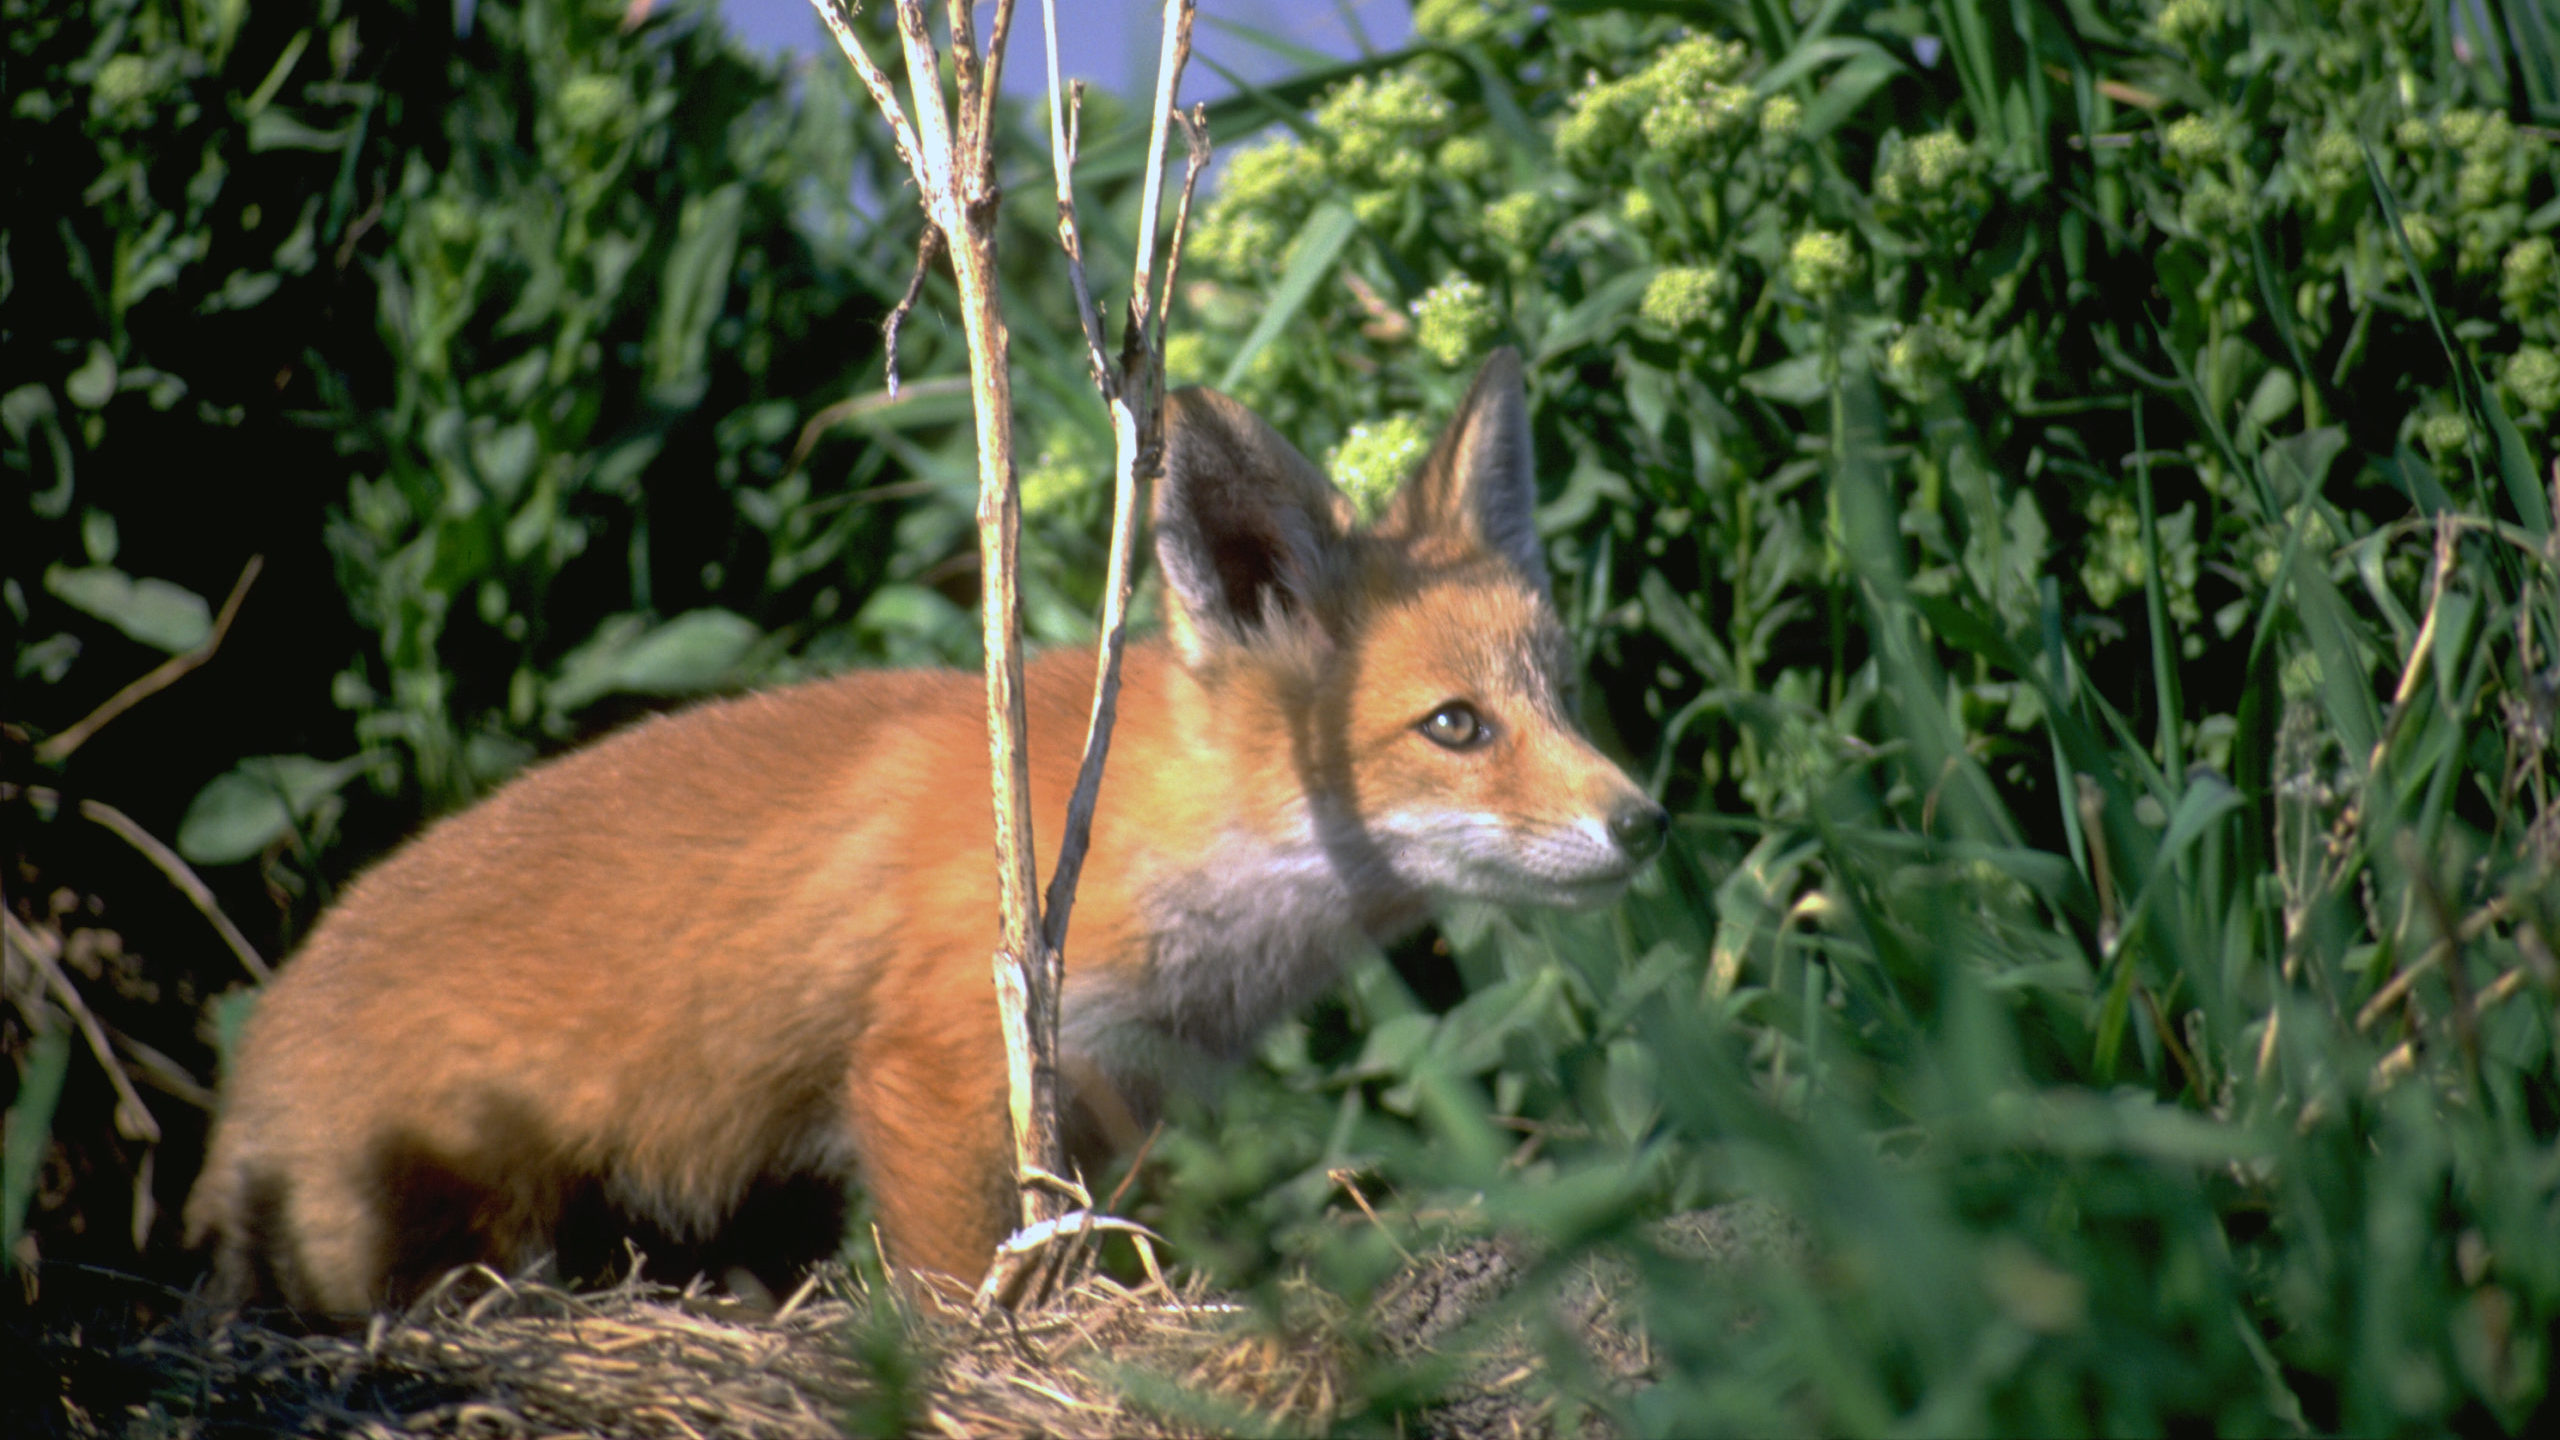 A red fox. Two red foxes tested positive for bird flu in Utah...